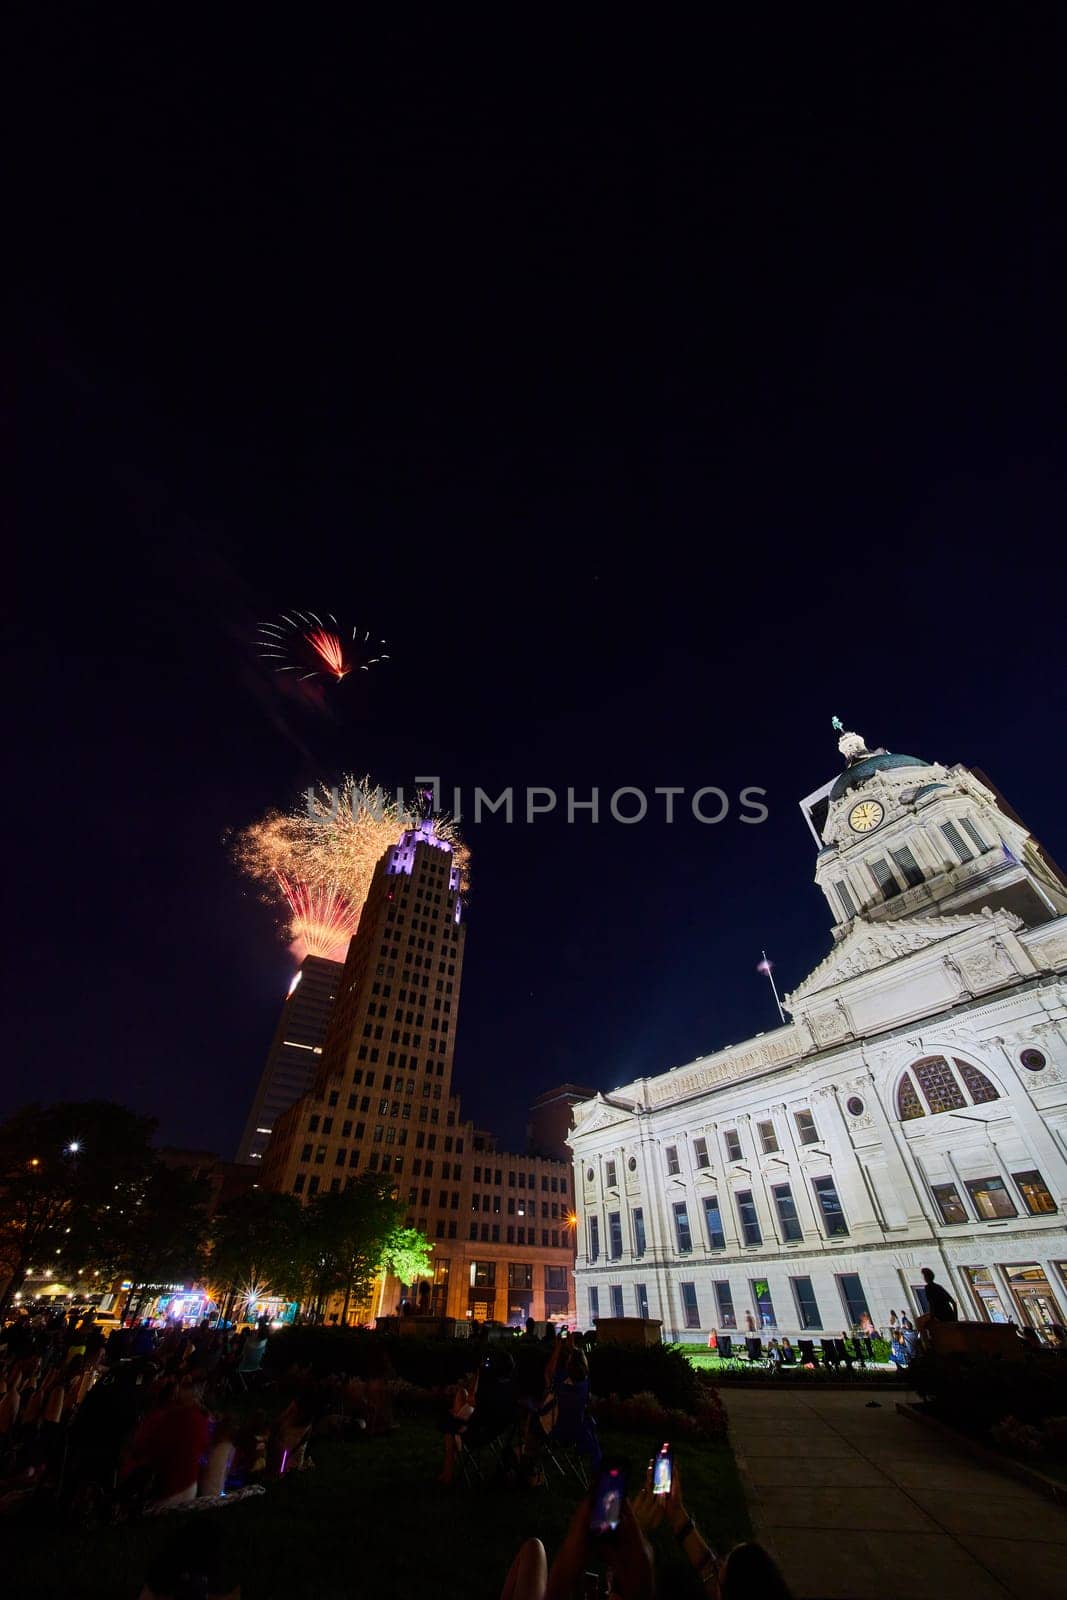 Fireworks in downtown Fort Wayne with courthouse and crowd of people watching by njproductions